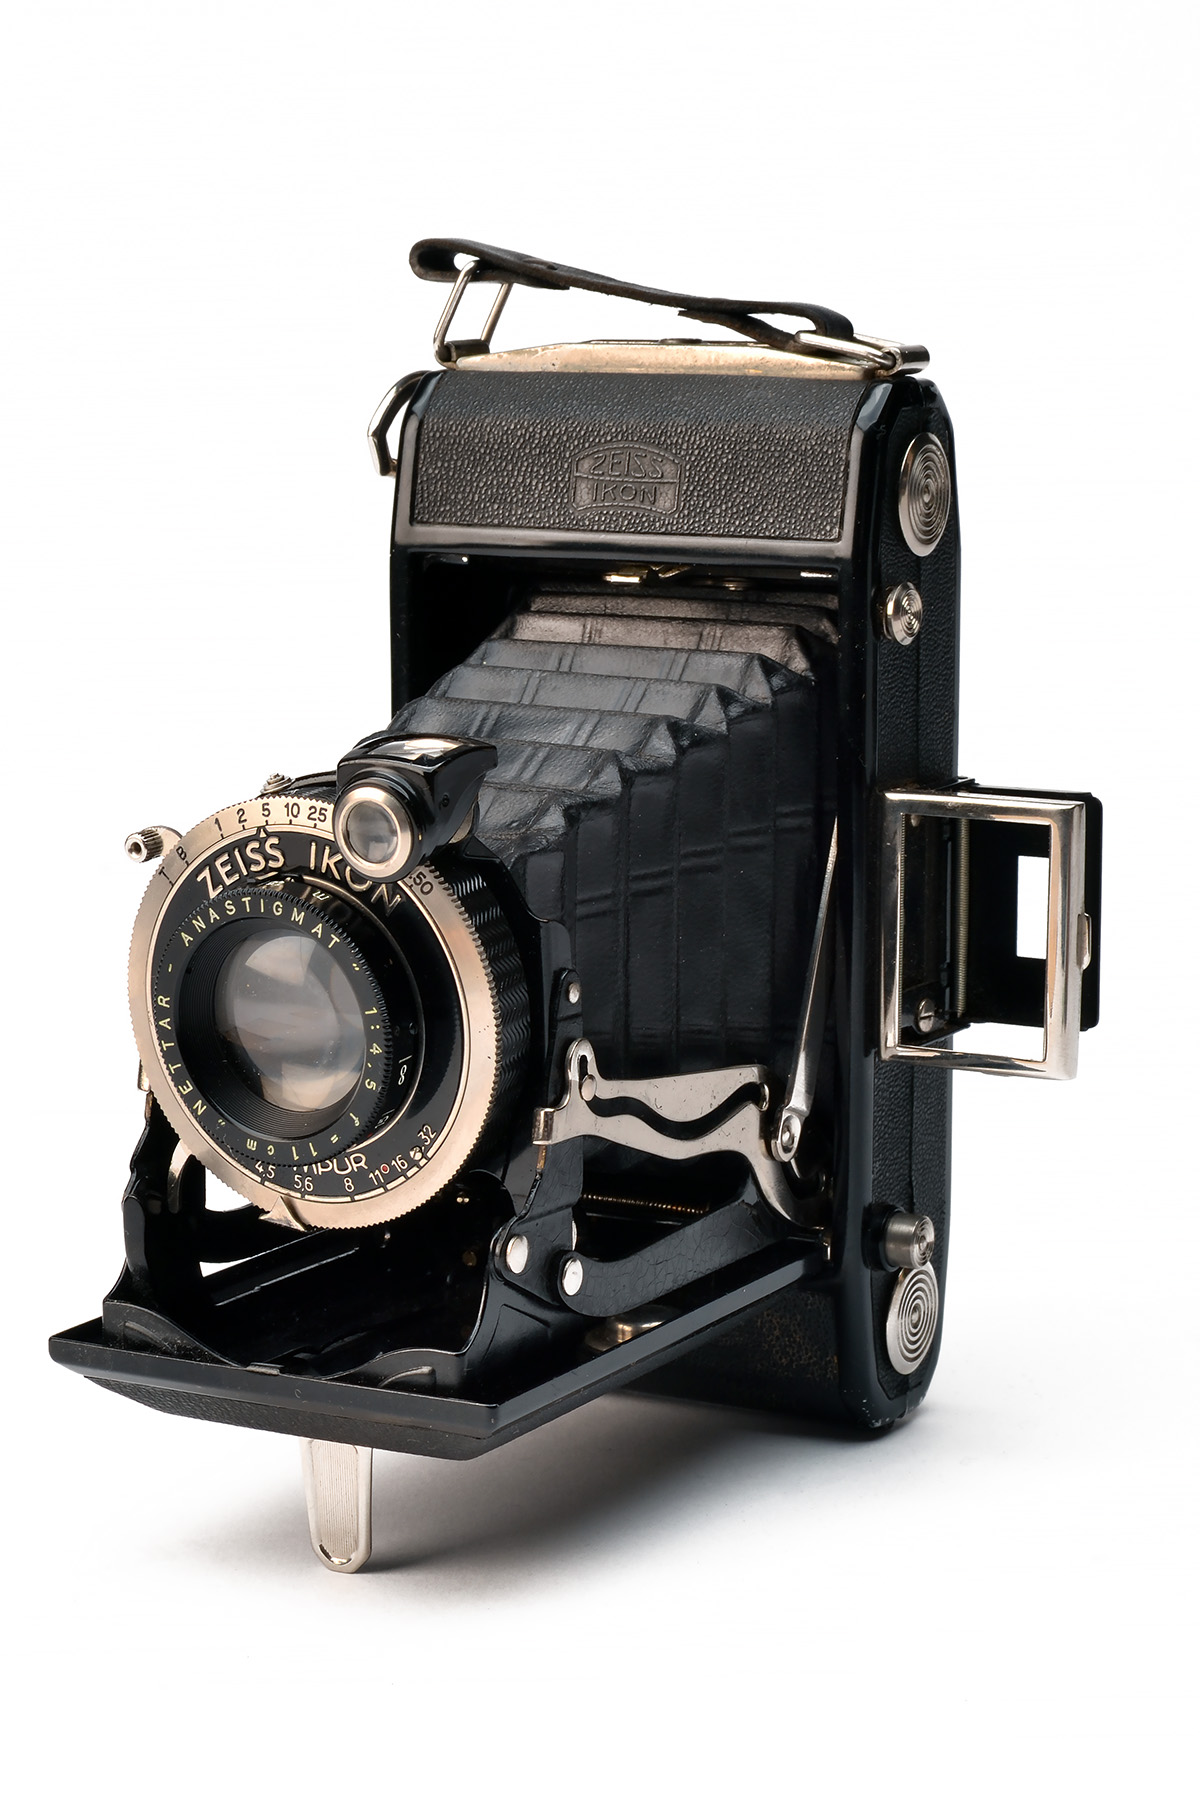 ZEISS, GERMANY A PRE WORLD WAR TWO BELLOWS CAMERA, MODEL 'IKON', serial no. 1253424, WITH U.S.